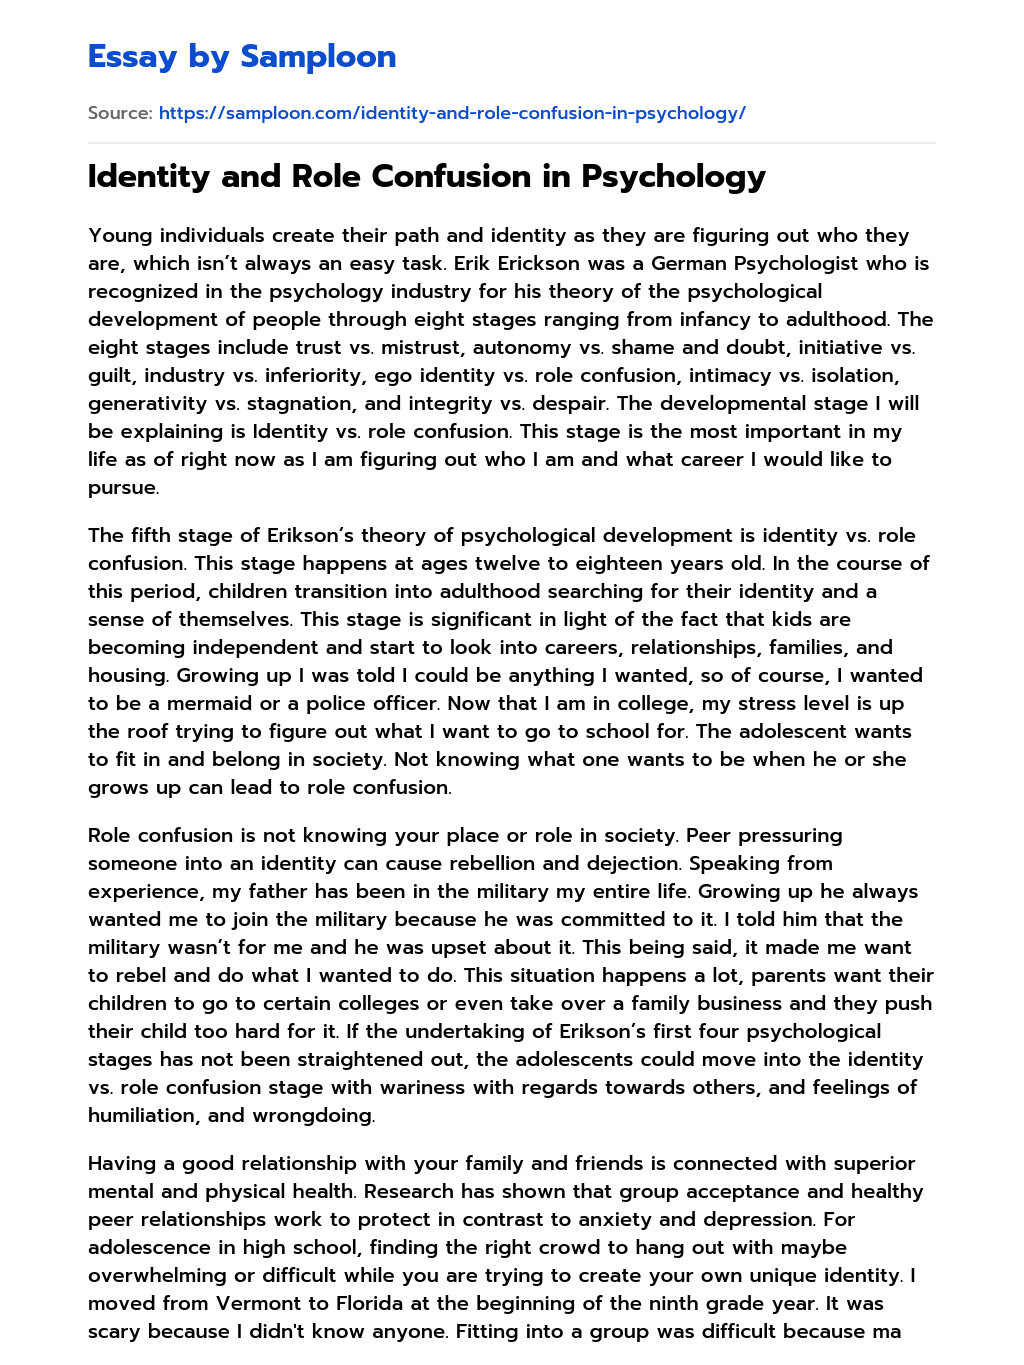 Identity and Role Confusion in Psychology essay